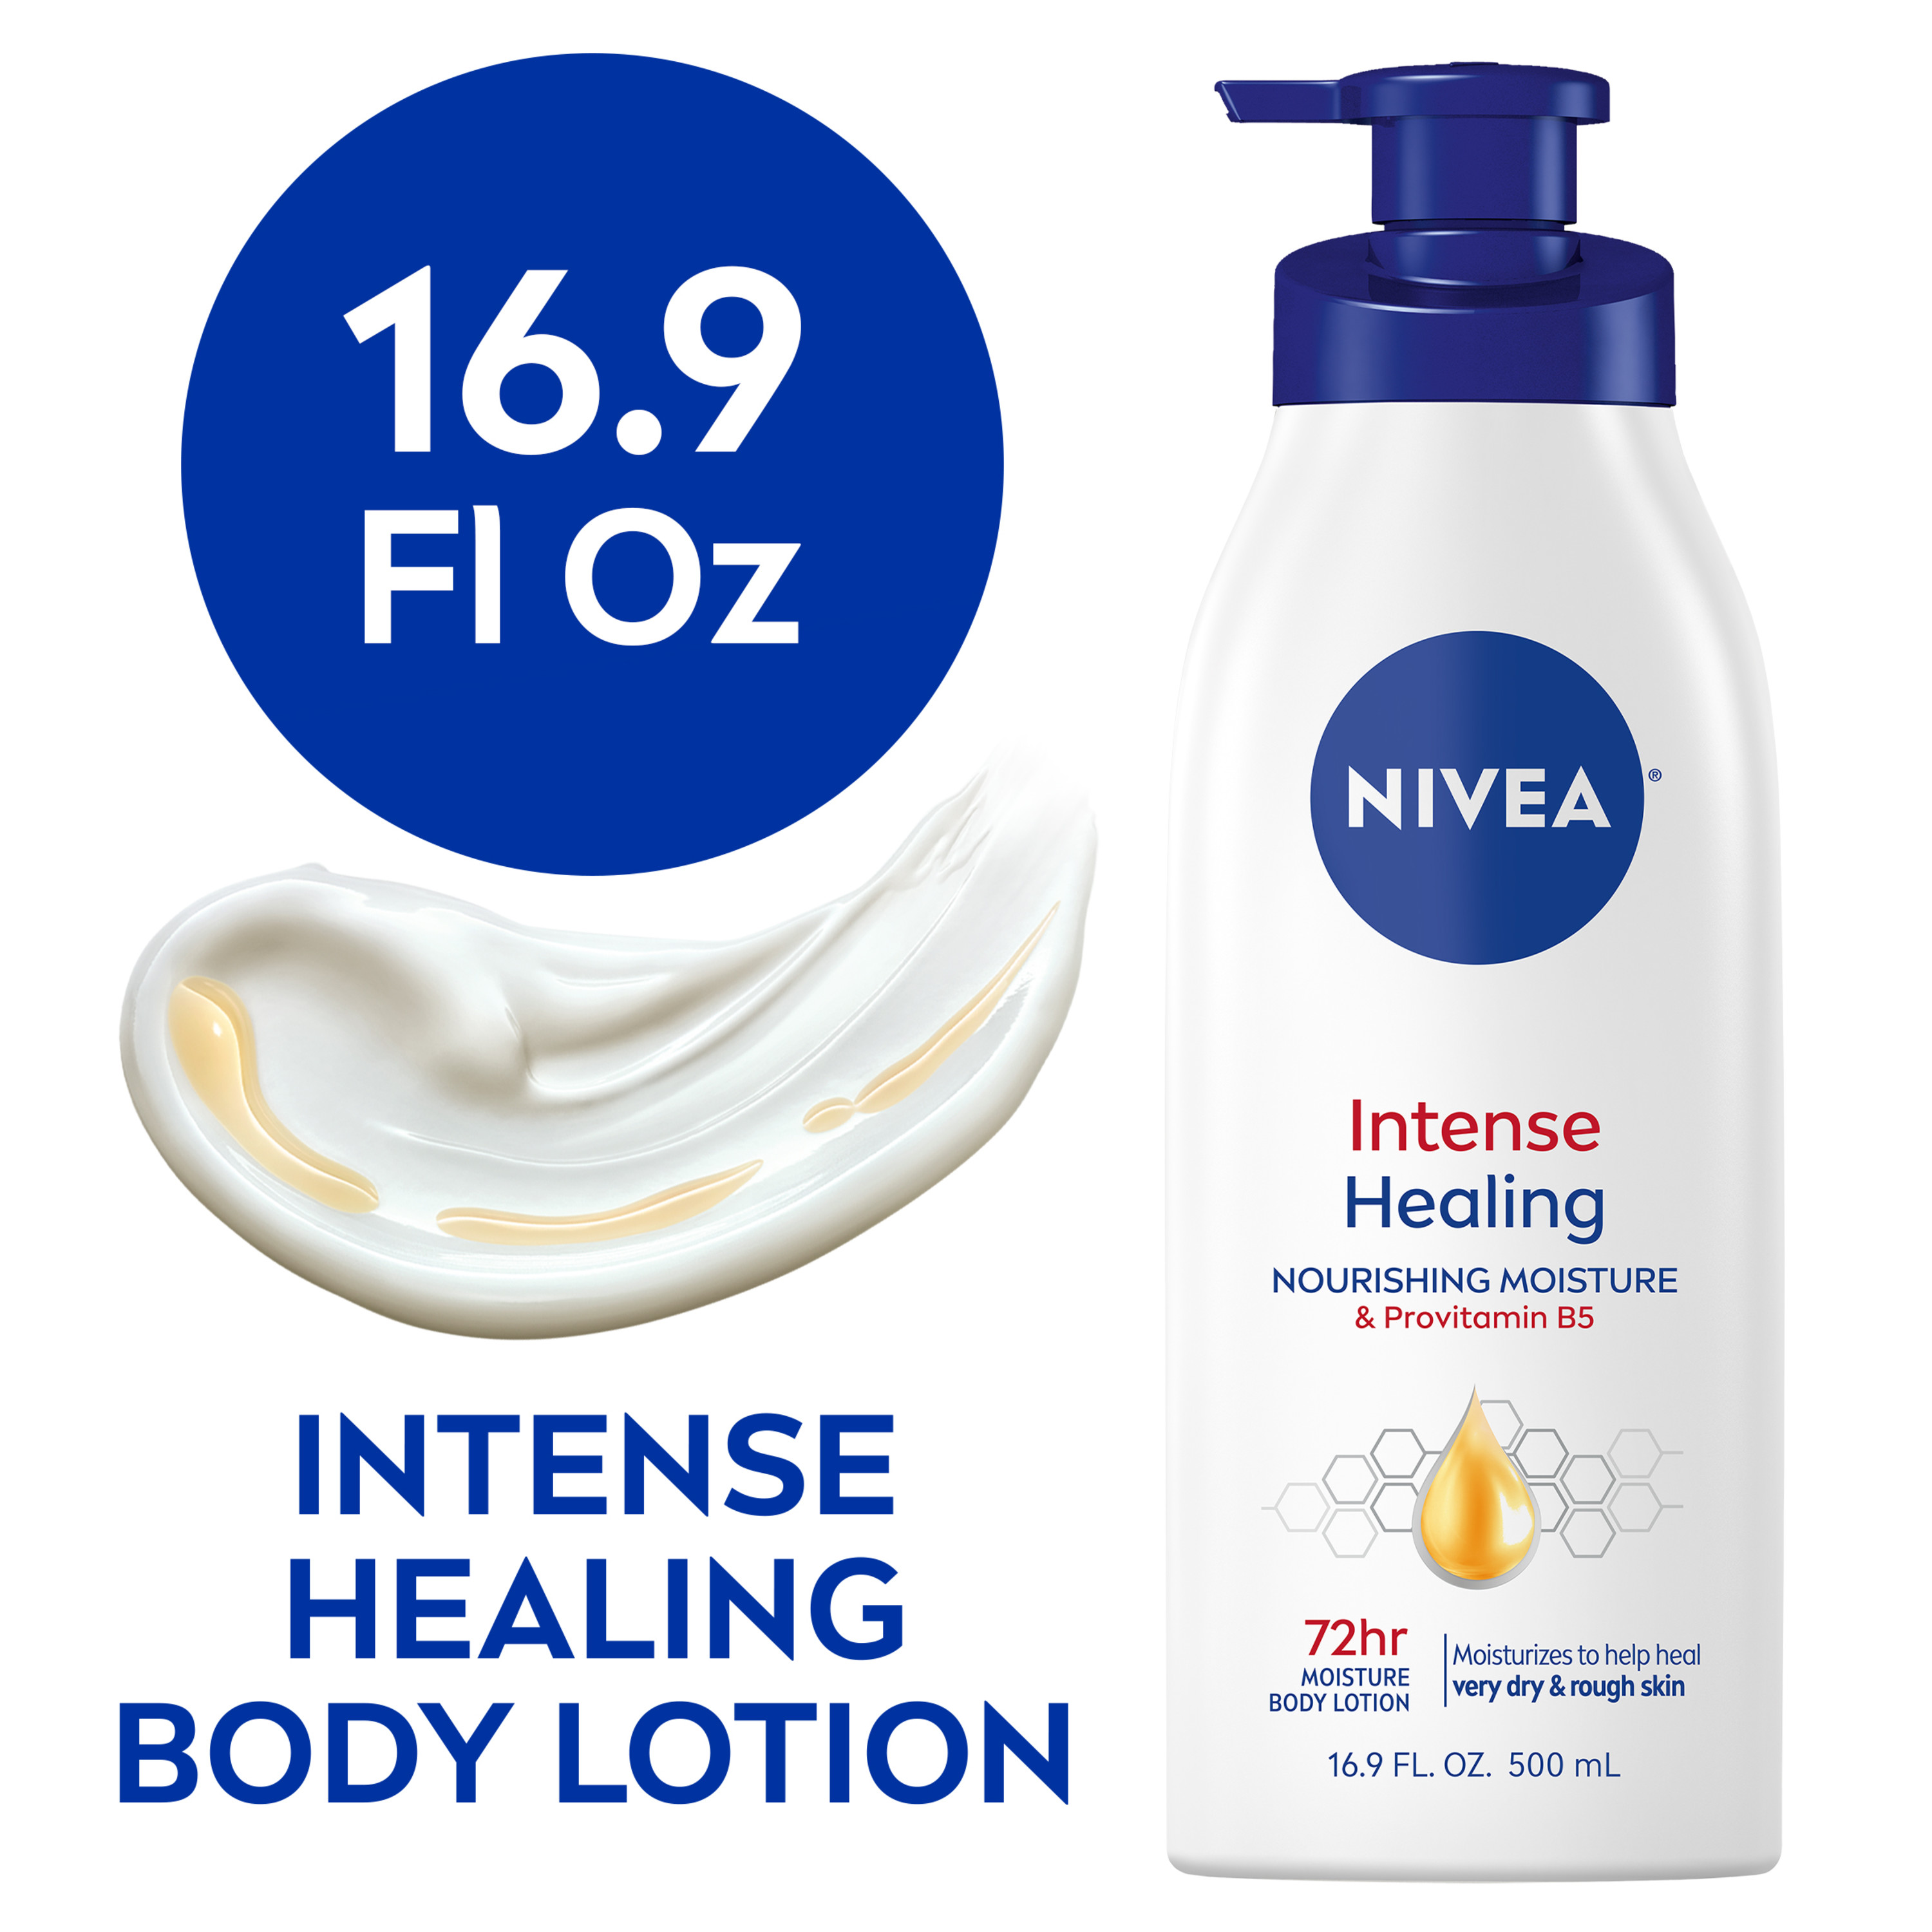 NIVEA Intense Healing Body Lotion, 72 Hour Moisture for Dry to Very Dry Skin, 16.9 Fl Oz Pump Bottle - image 1 of 11